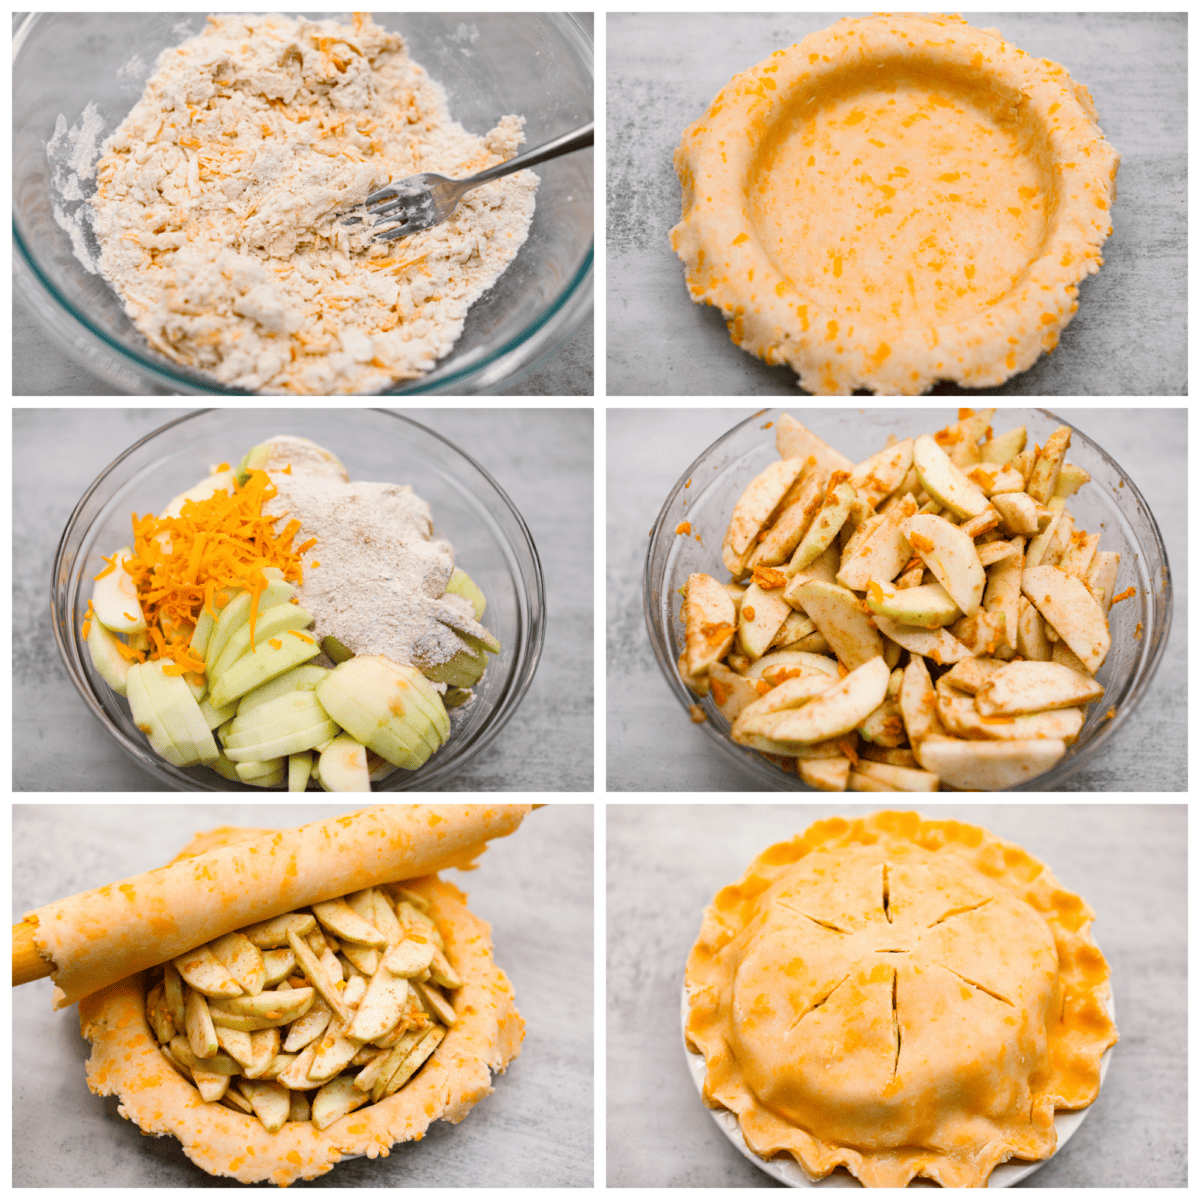 6 photos showing how to make the pie and put it together. 